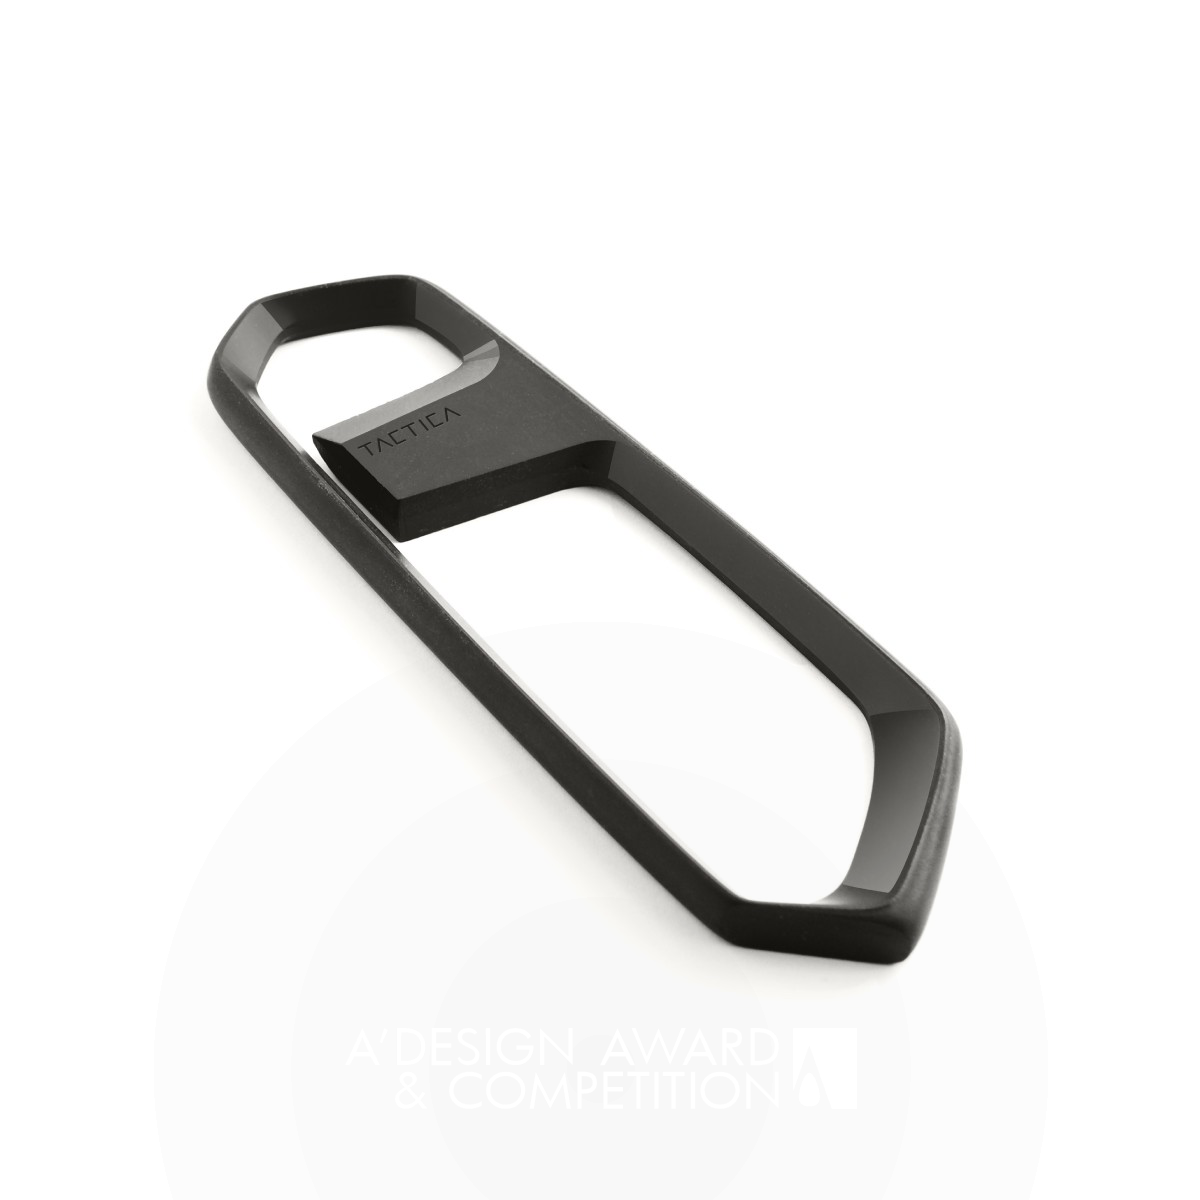 Tactica One Bottle opener by Michael Chijoff